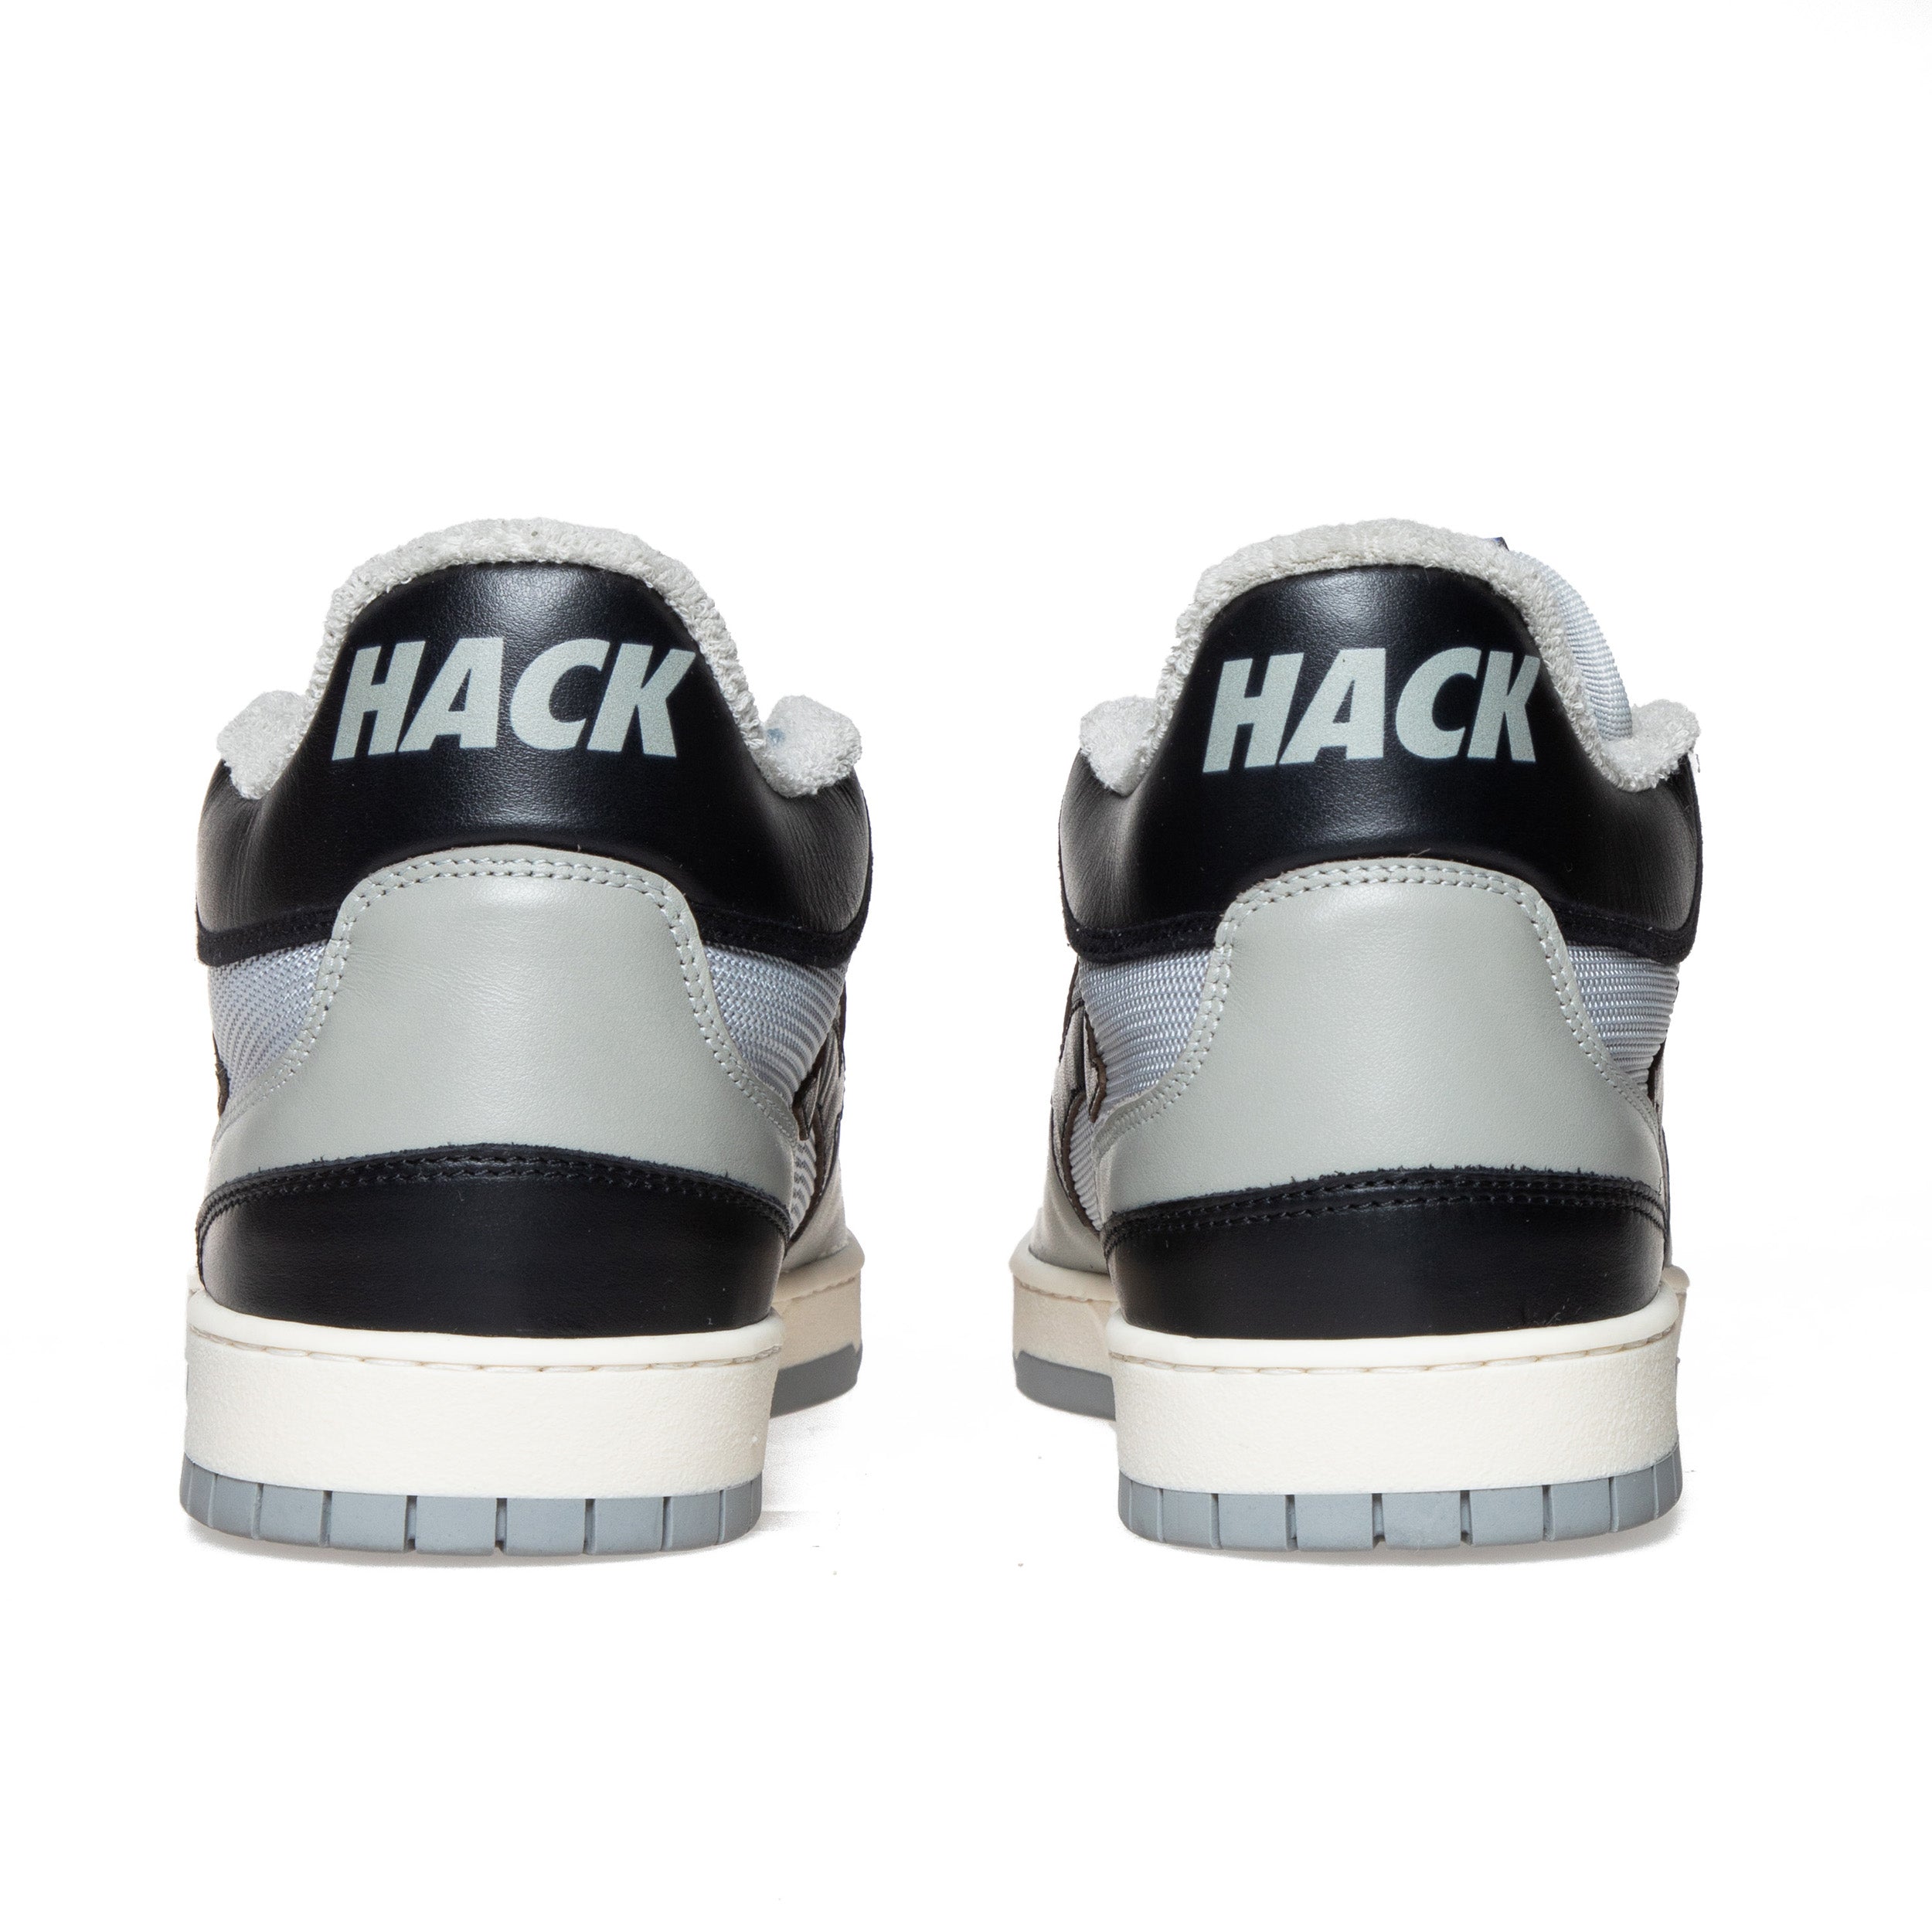 Hack Attack - Grey - Thinking Different.